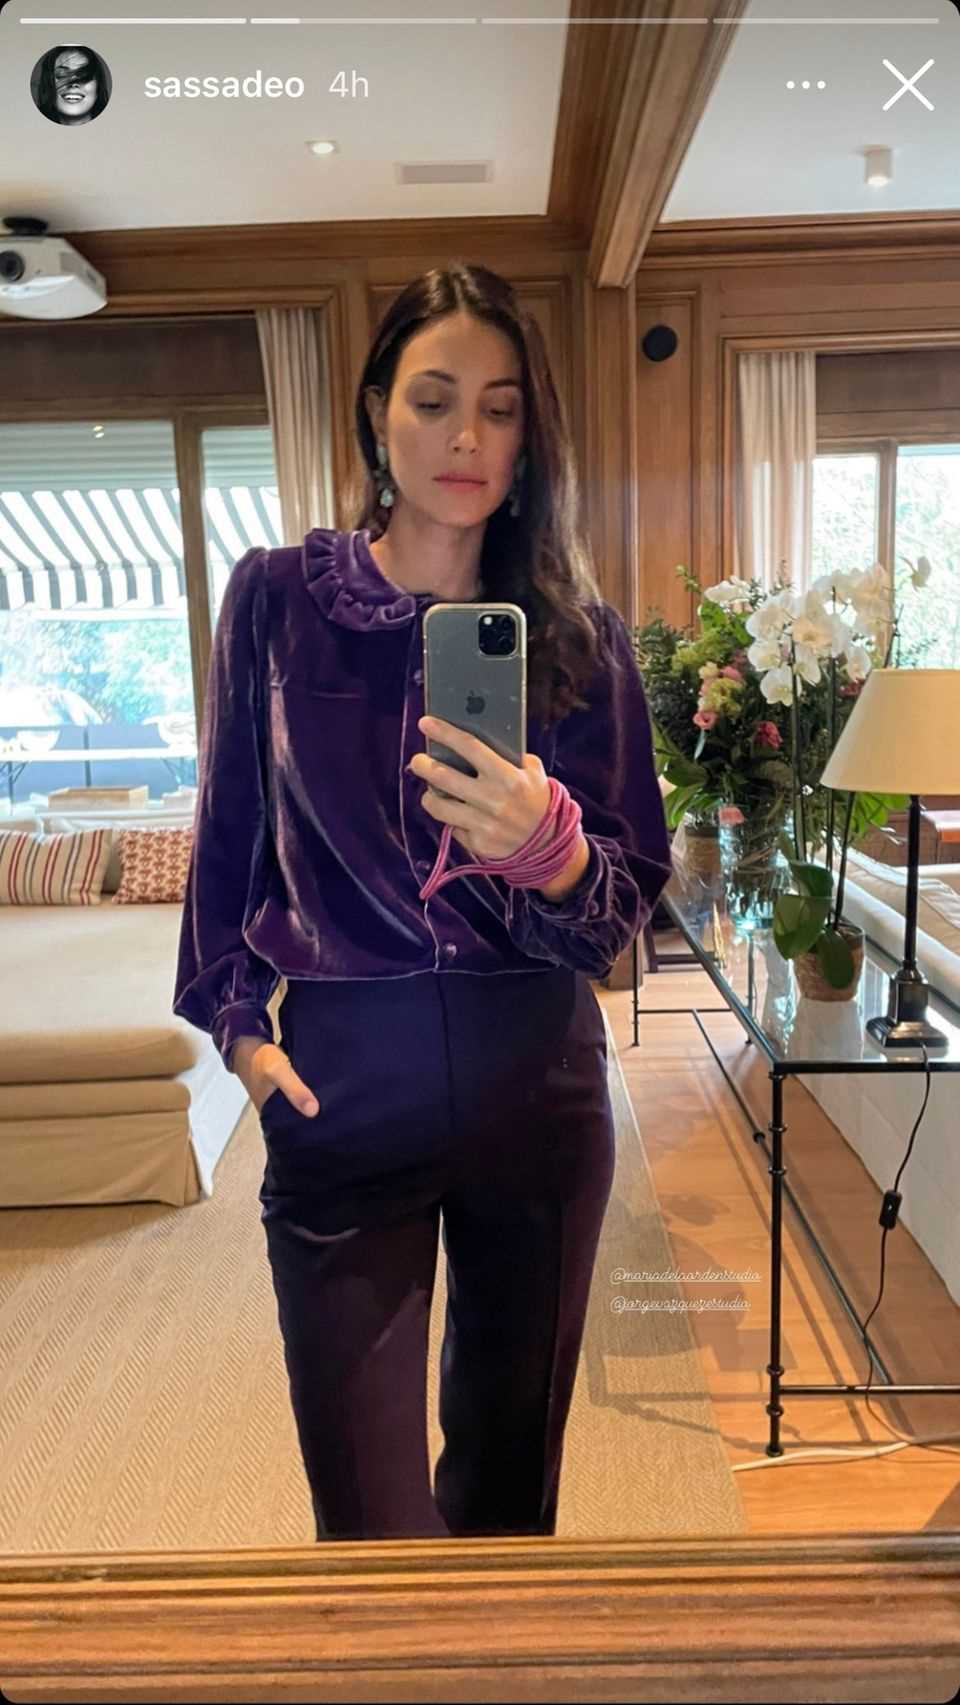 Alessandra de Osma poses in front of a mirror in her home